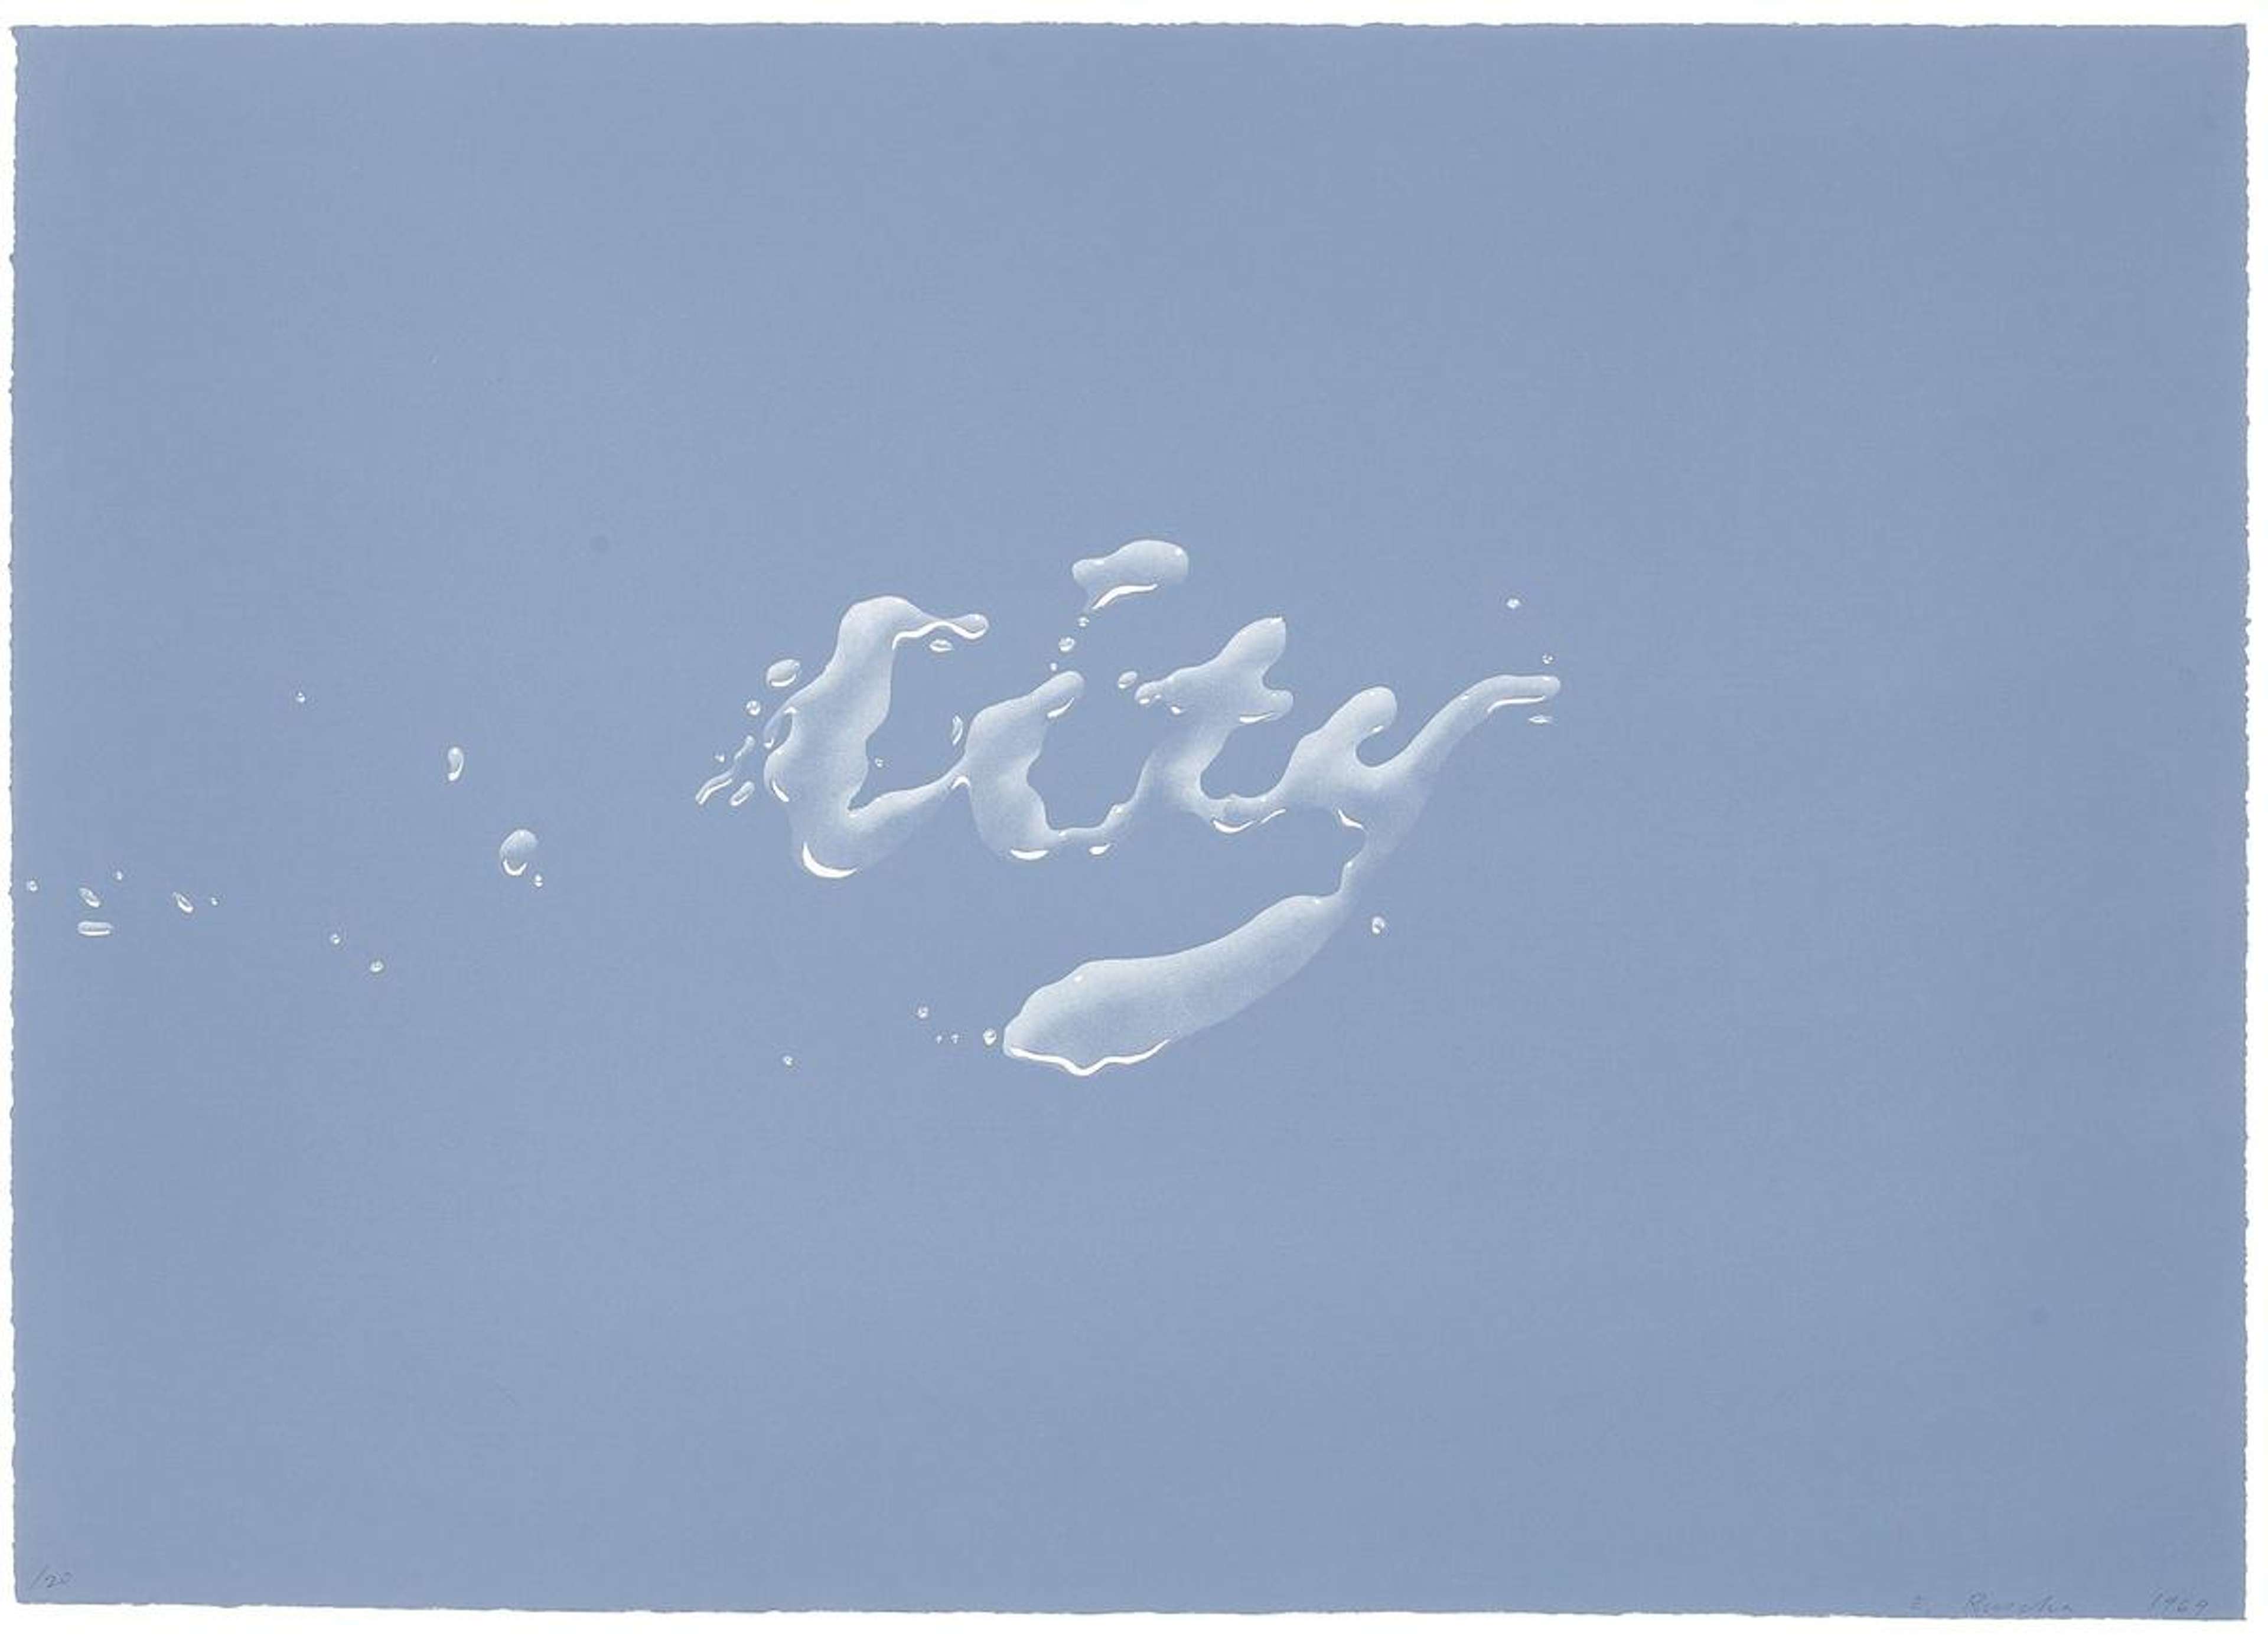 Lithograph by Ed Ruscha depicting the word 'city', with lettering which resembles splashes of water. The word is a light blue, set against a darker, greyish-blue background.